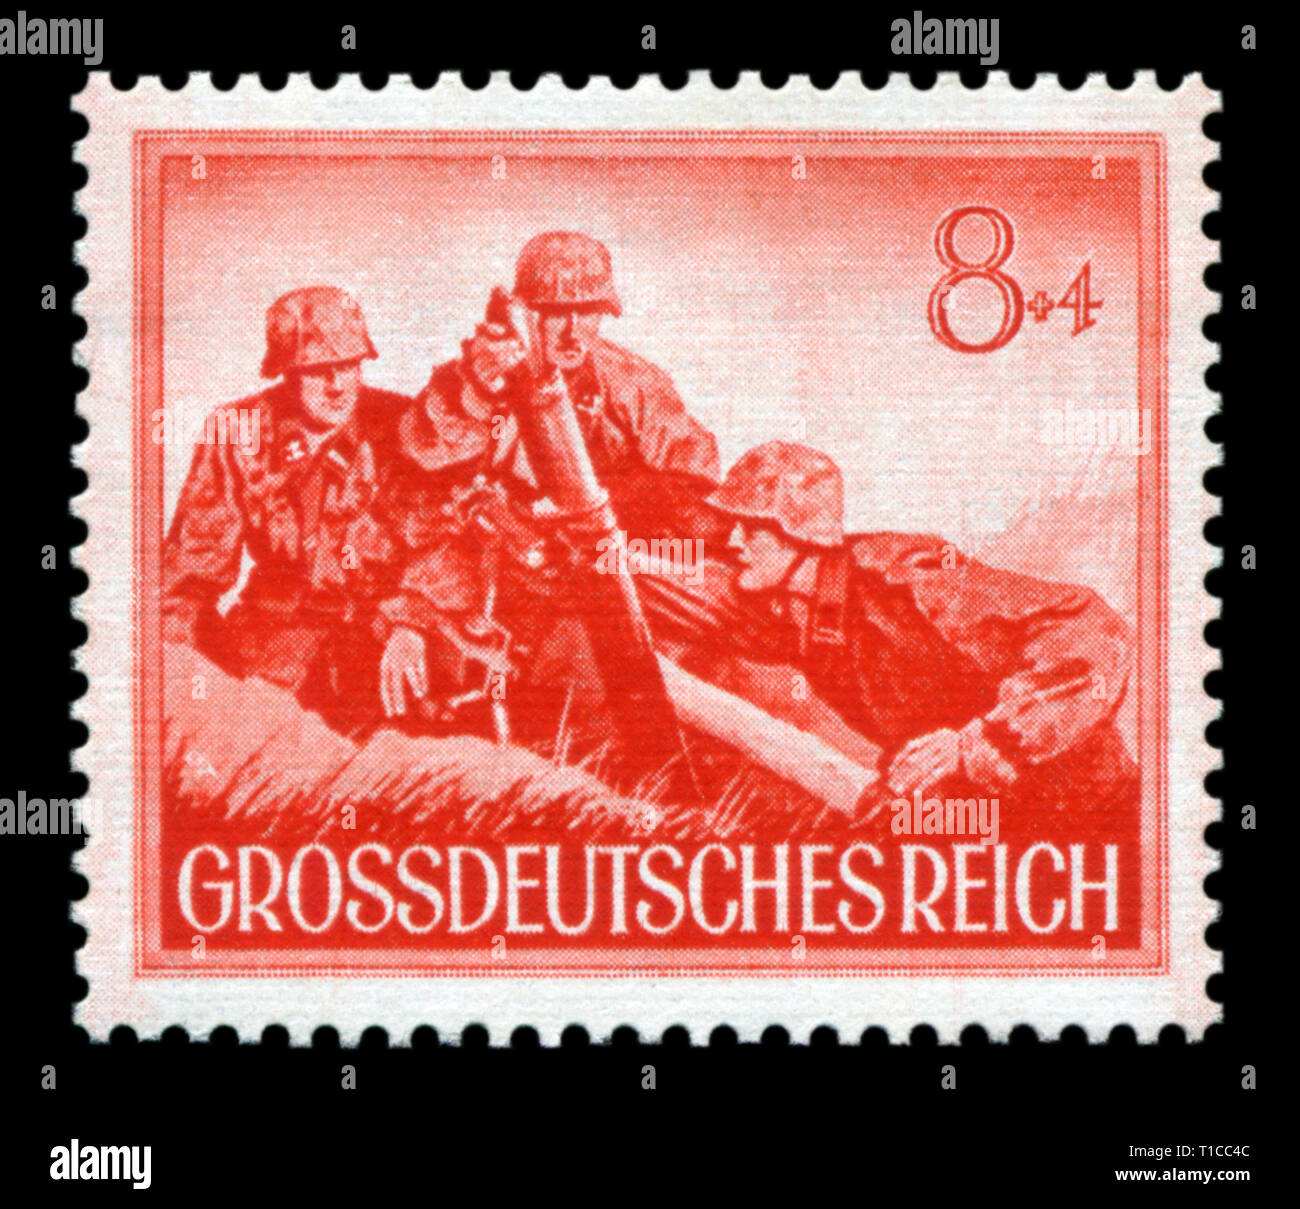 German historical stamp: The mortar elite unit of the Waffen SS. The Army Of The third Reich. Day of commemoration of the fallen soldiers, issue 1944 Stock Photo